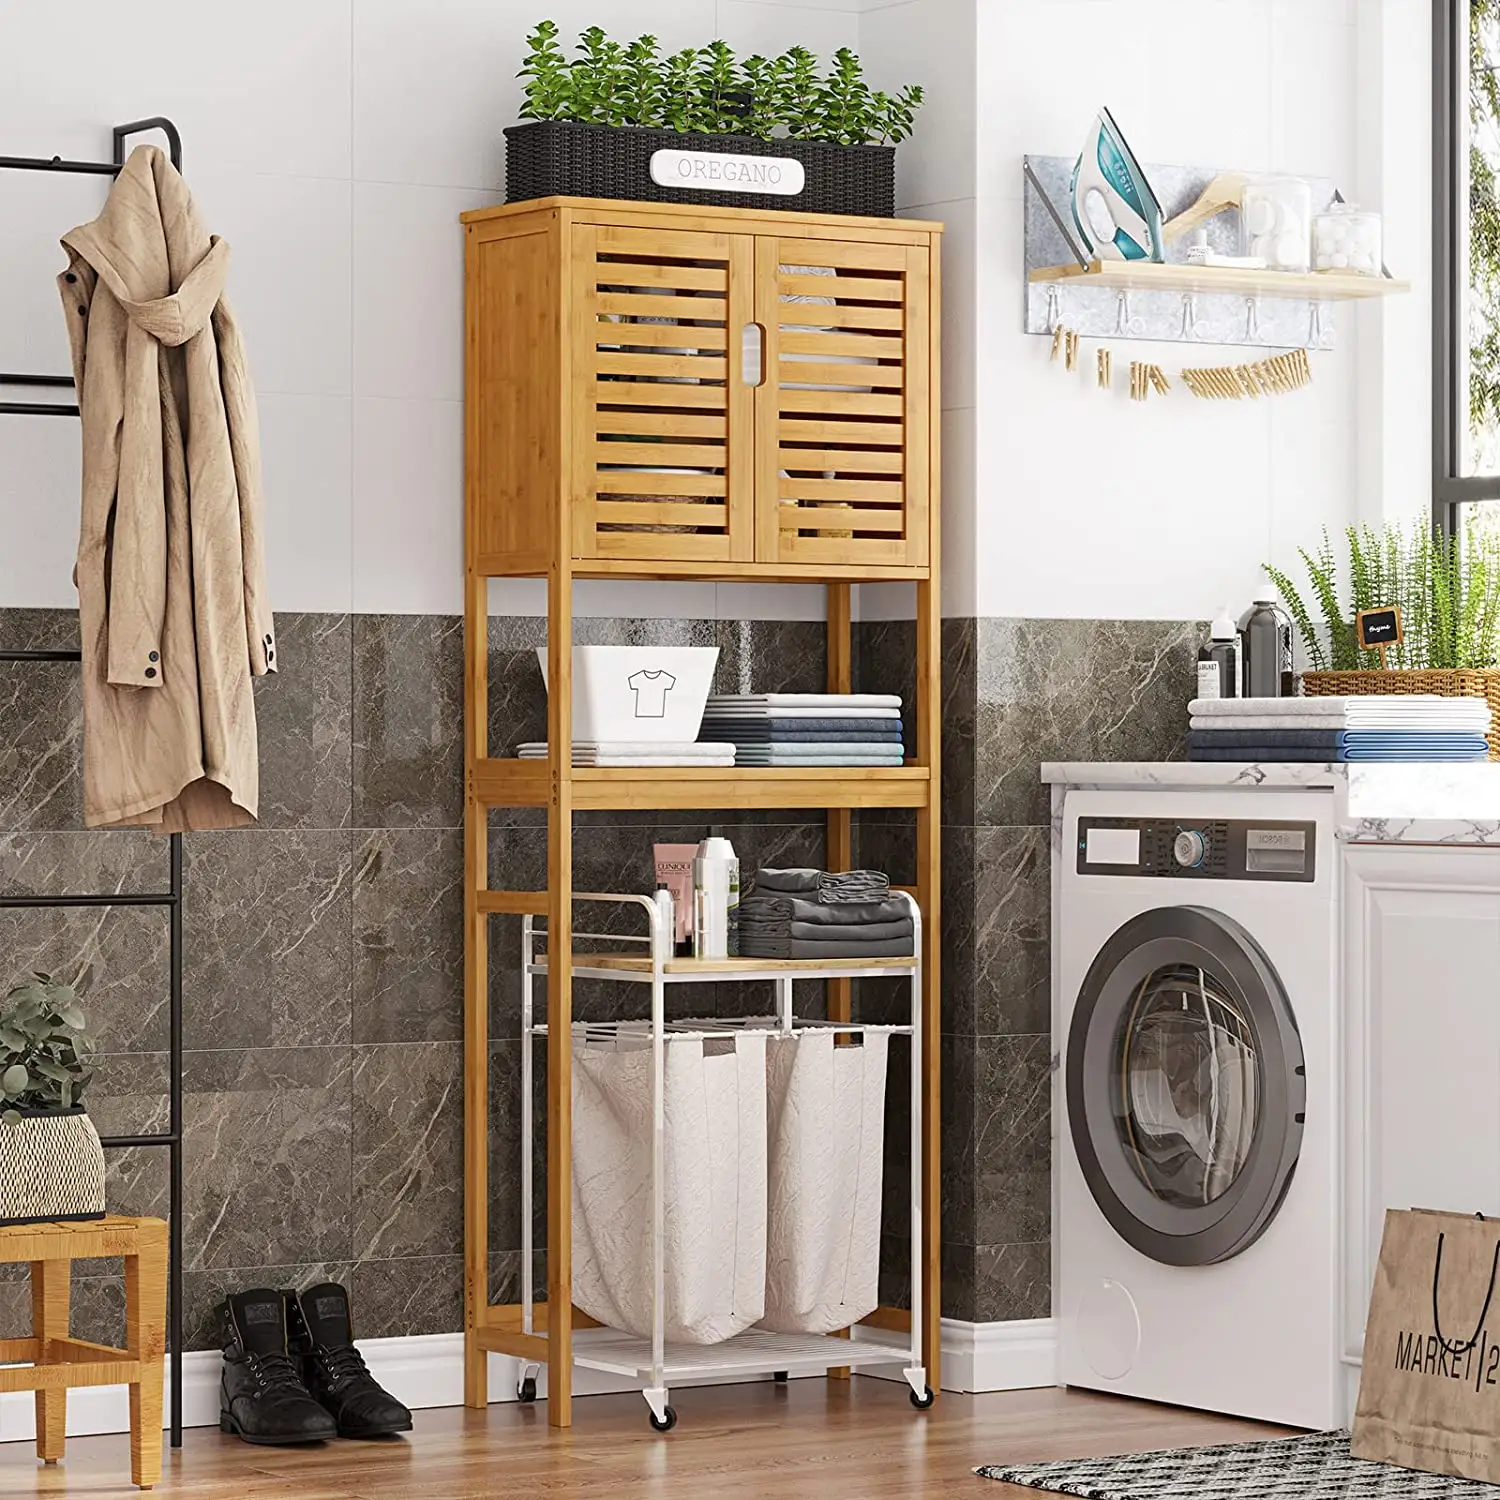 Over The Toilet Storage Cabinet, Tall Bathroom Cabinet Organizer with Cupboard and Adjustable Shelves, Freestanding Toilet Shelf